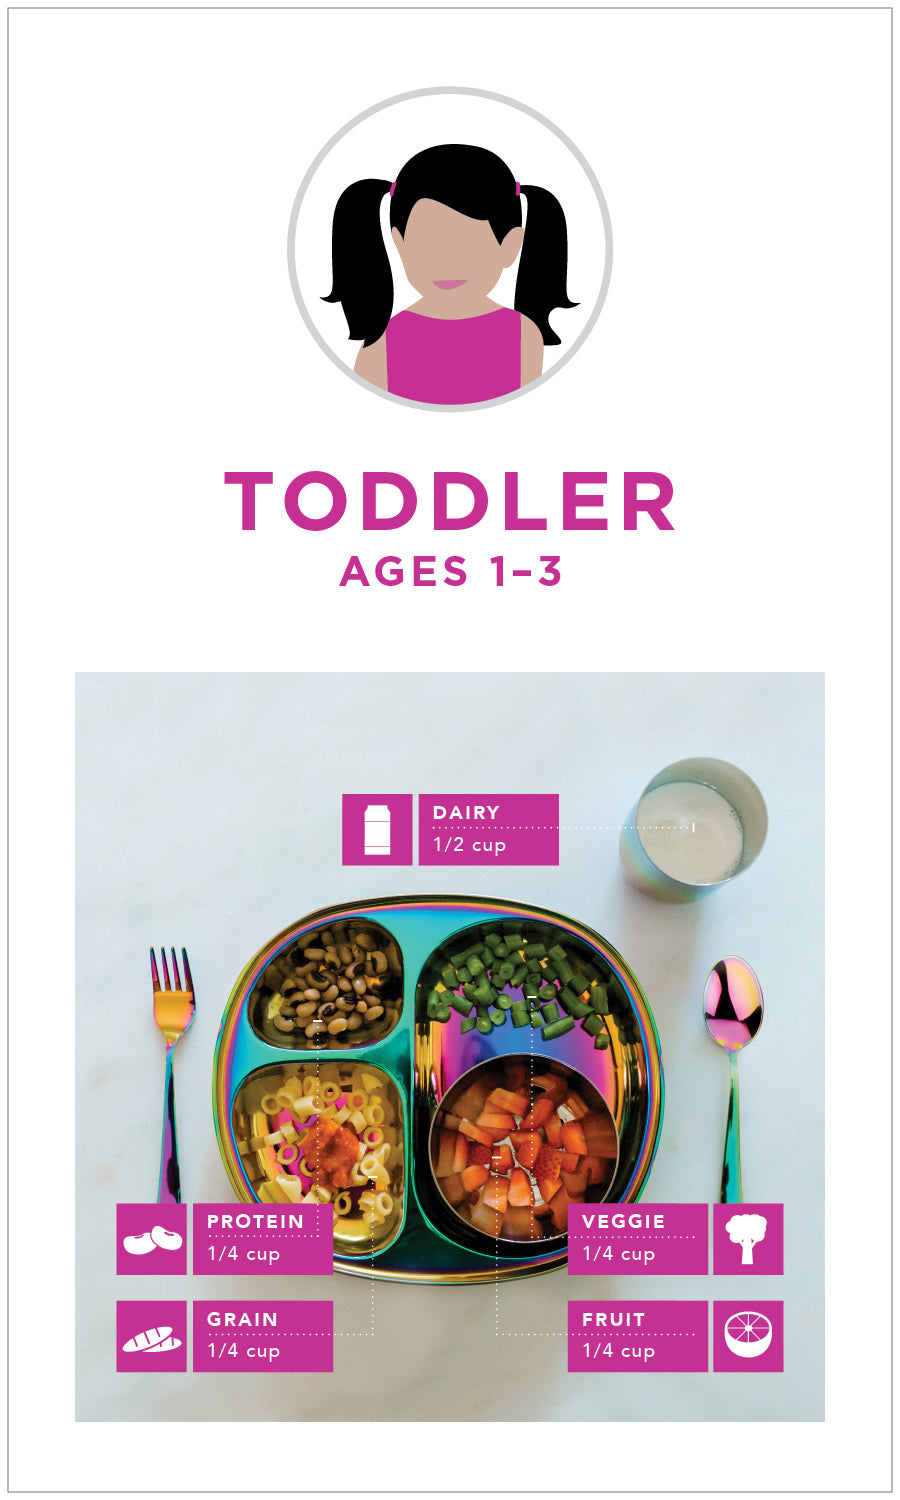 Toddler ages 1-3 Mealtime Guides - Dairy 1/2 cup, Protein 1/4 cup, Grain 1/4 cup, Veggie 1/4 cup and Fruit 1/4 cup